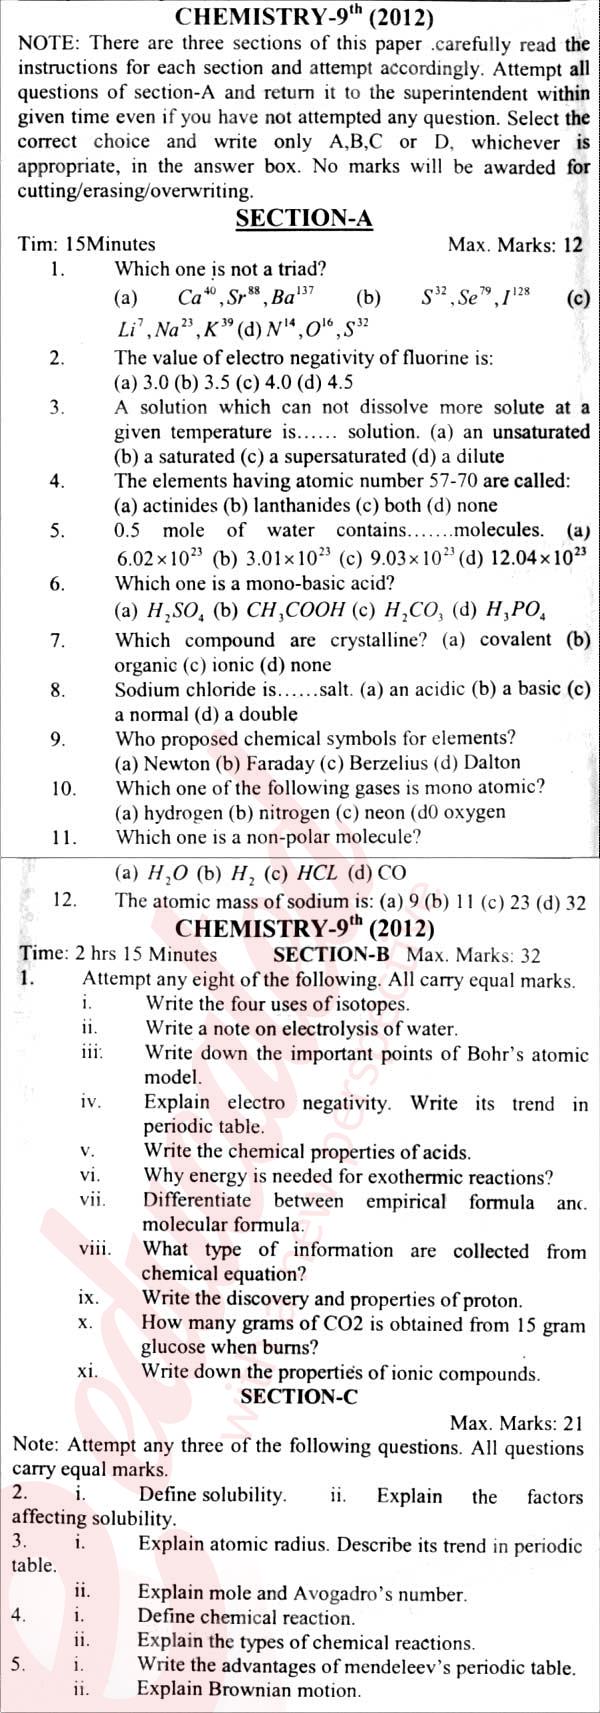 Chemistry 9th English Medium Past Paper Group 1 BISE Abbottabad 2012